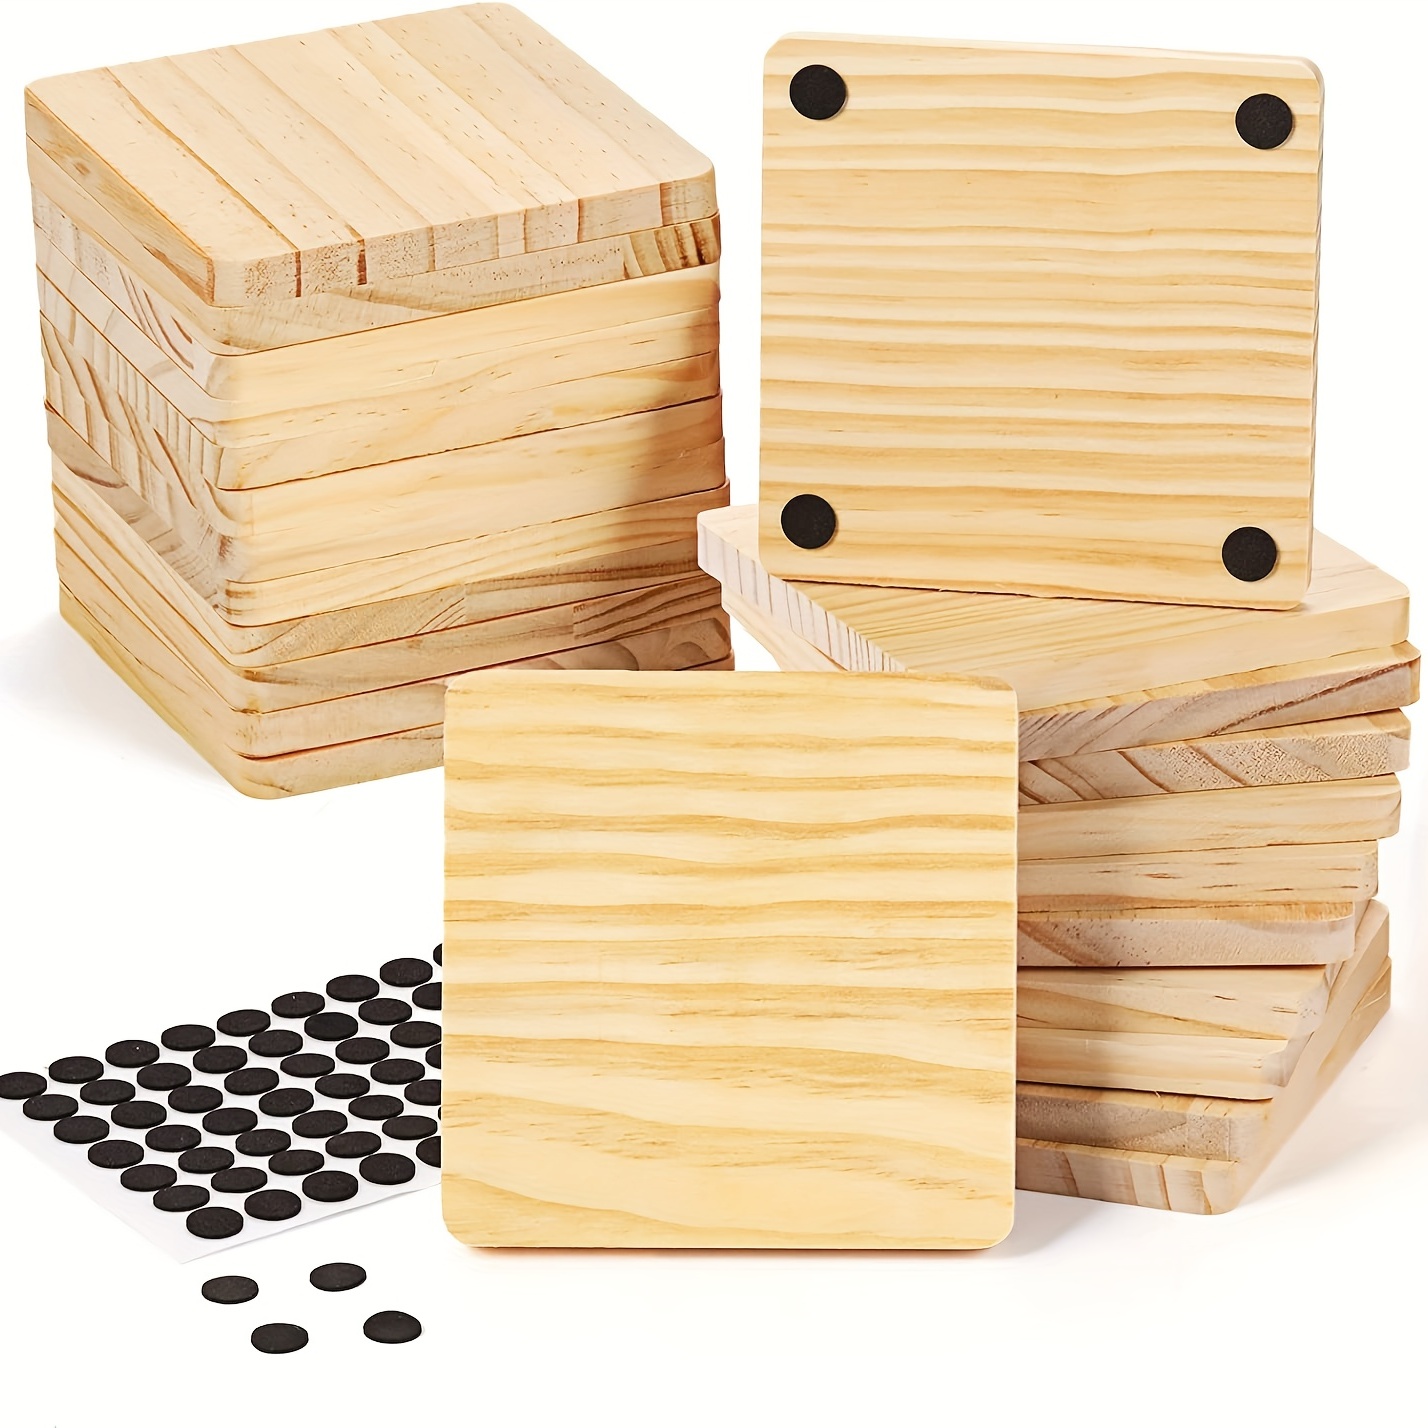 3cm 4cm Pine Wood Square Block Natural Soild Wooden Cube Crafts DIY Puzzle  Making Woodworking